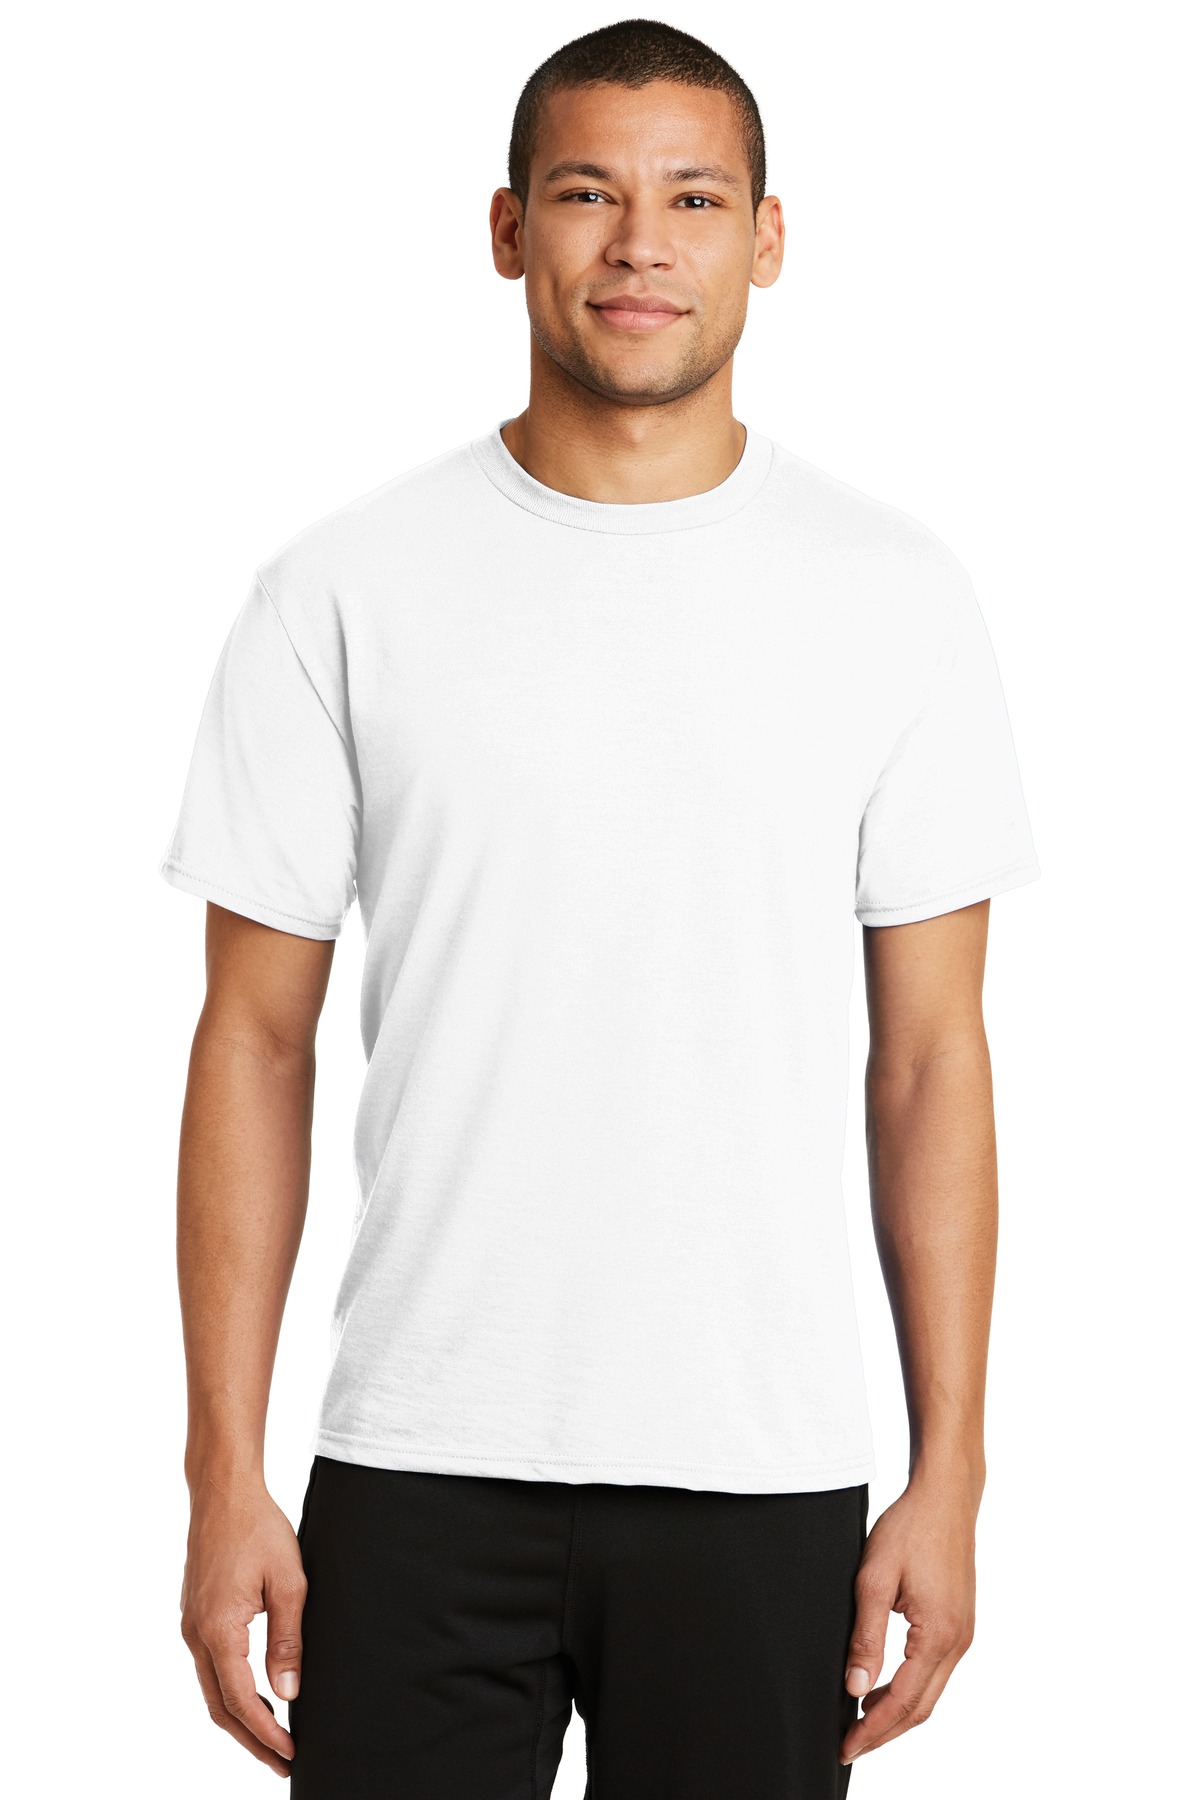 Port & Company Activewear T-Shirts for Hospitality ® Performance Blend Tee.-Port & Company